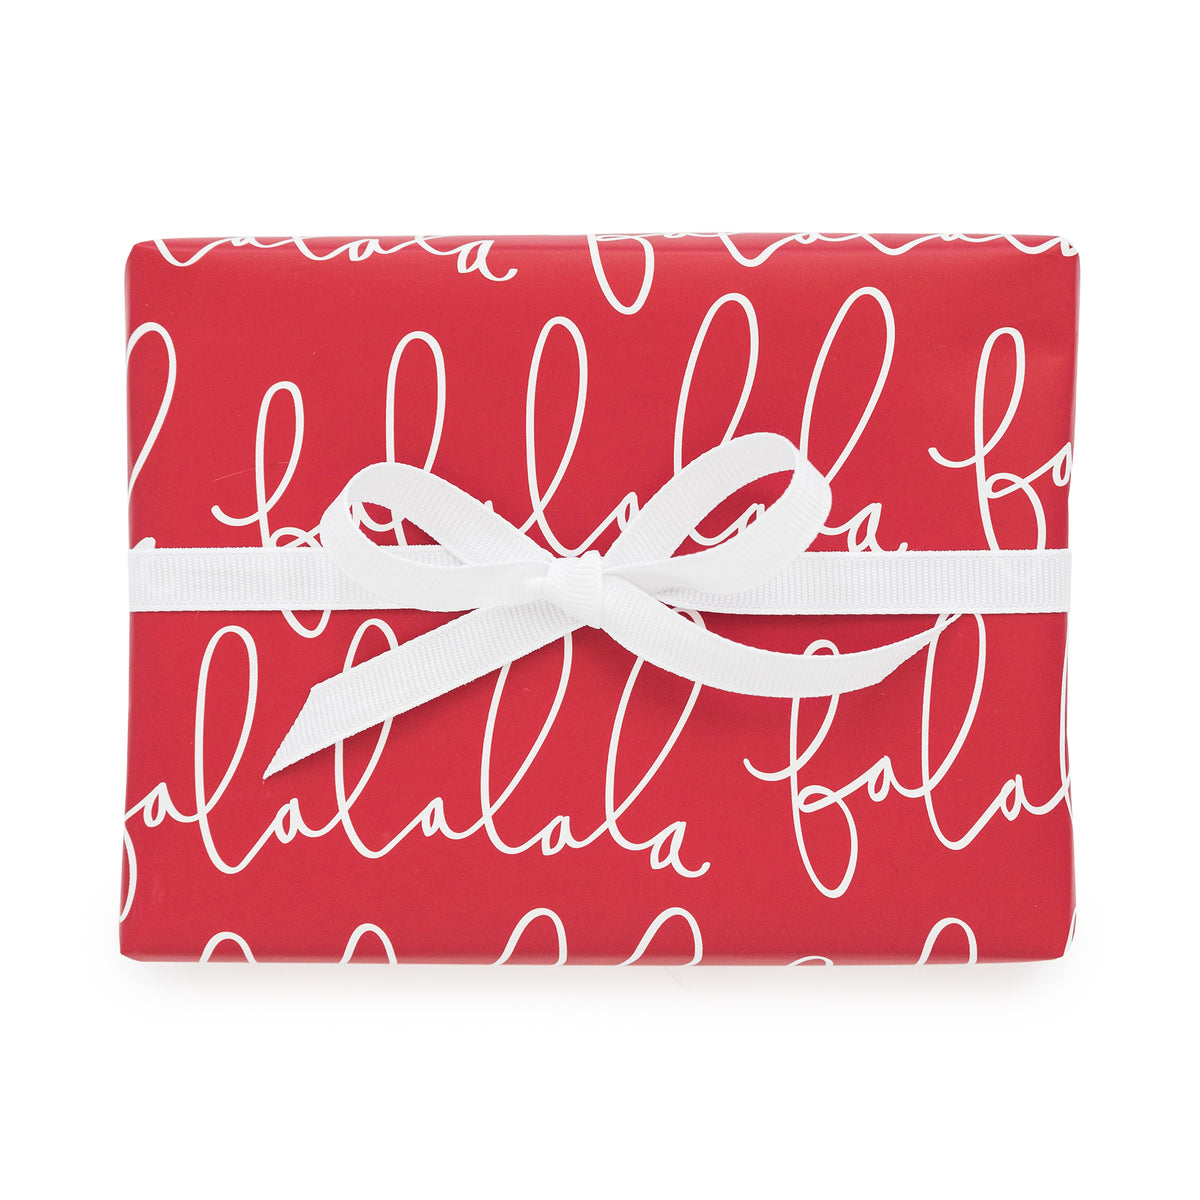 Red wrapping paper with white falalala script